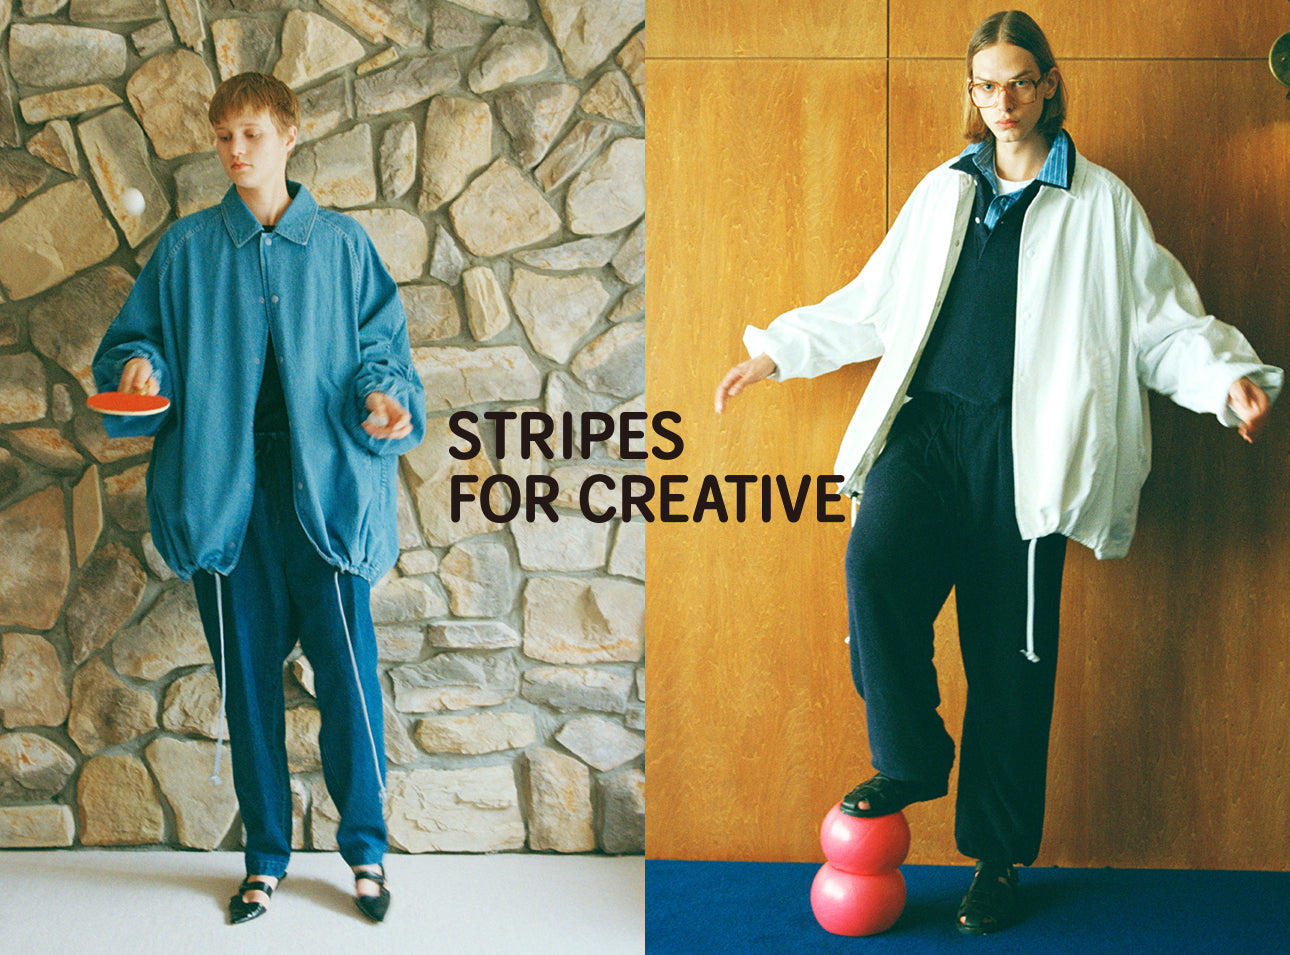 NEW BRAND S.F.C - Stripes For Creative -